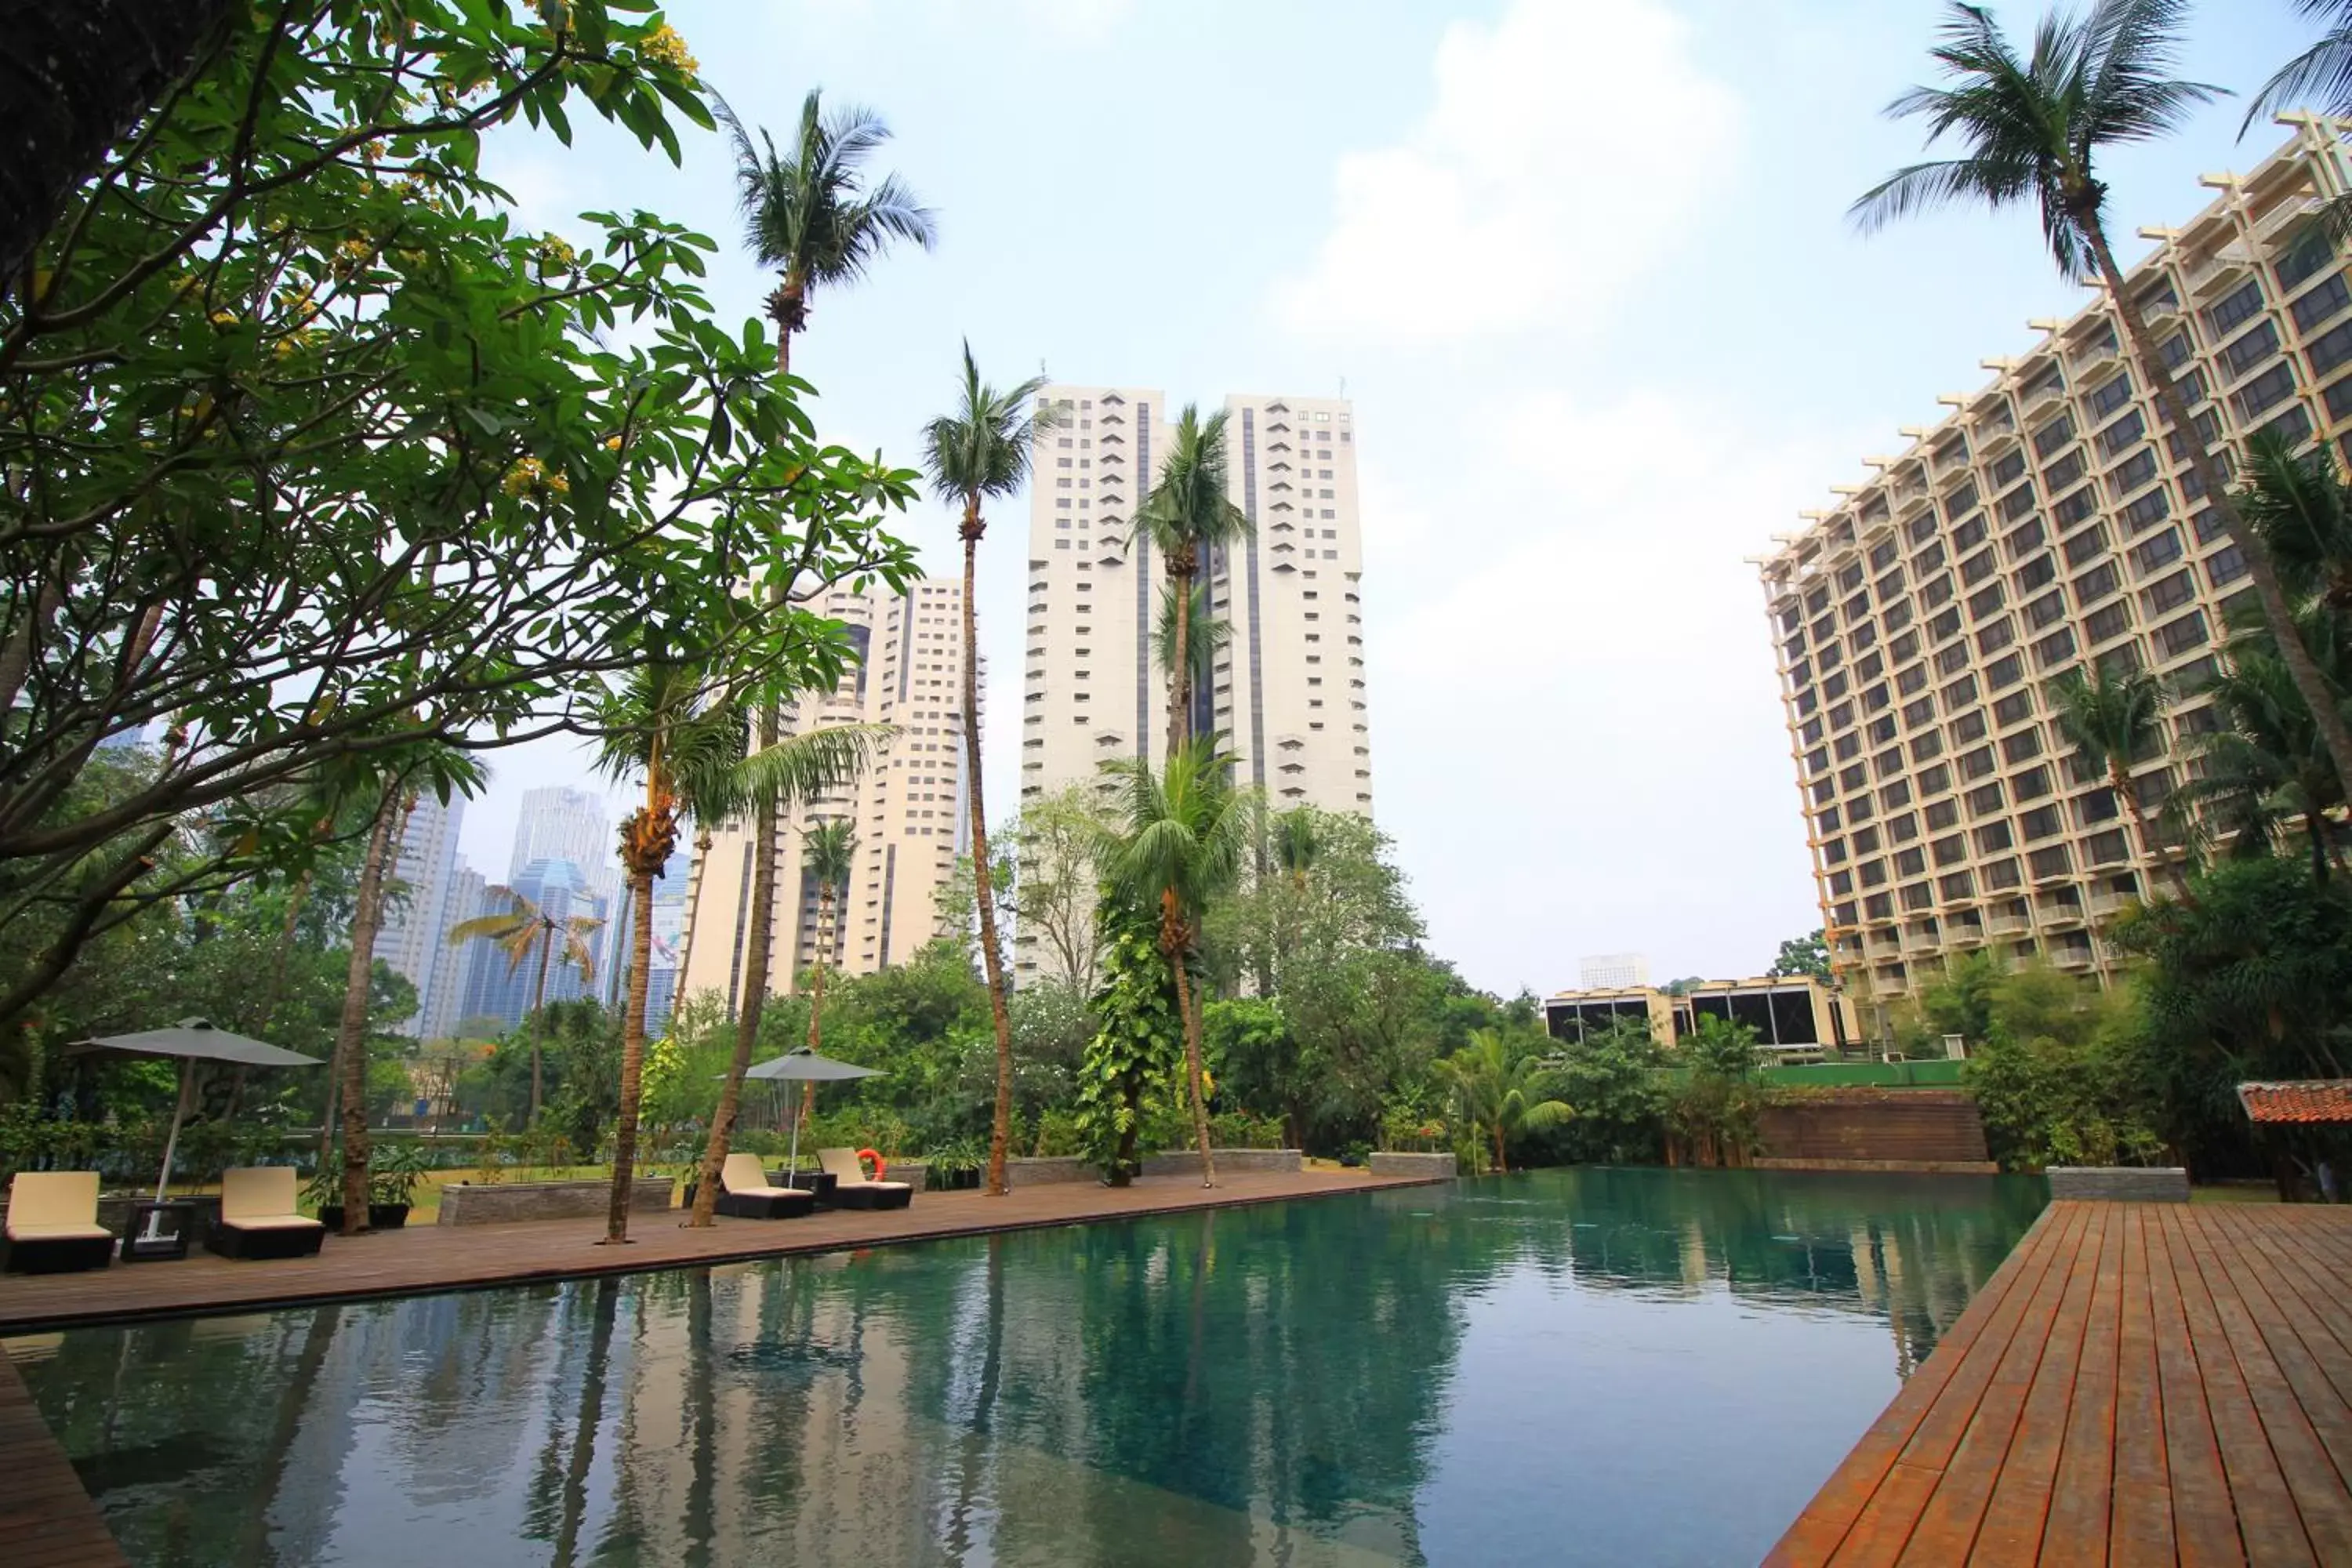 Swimming Pool in The Sultan Hotel & Residence Jakarta